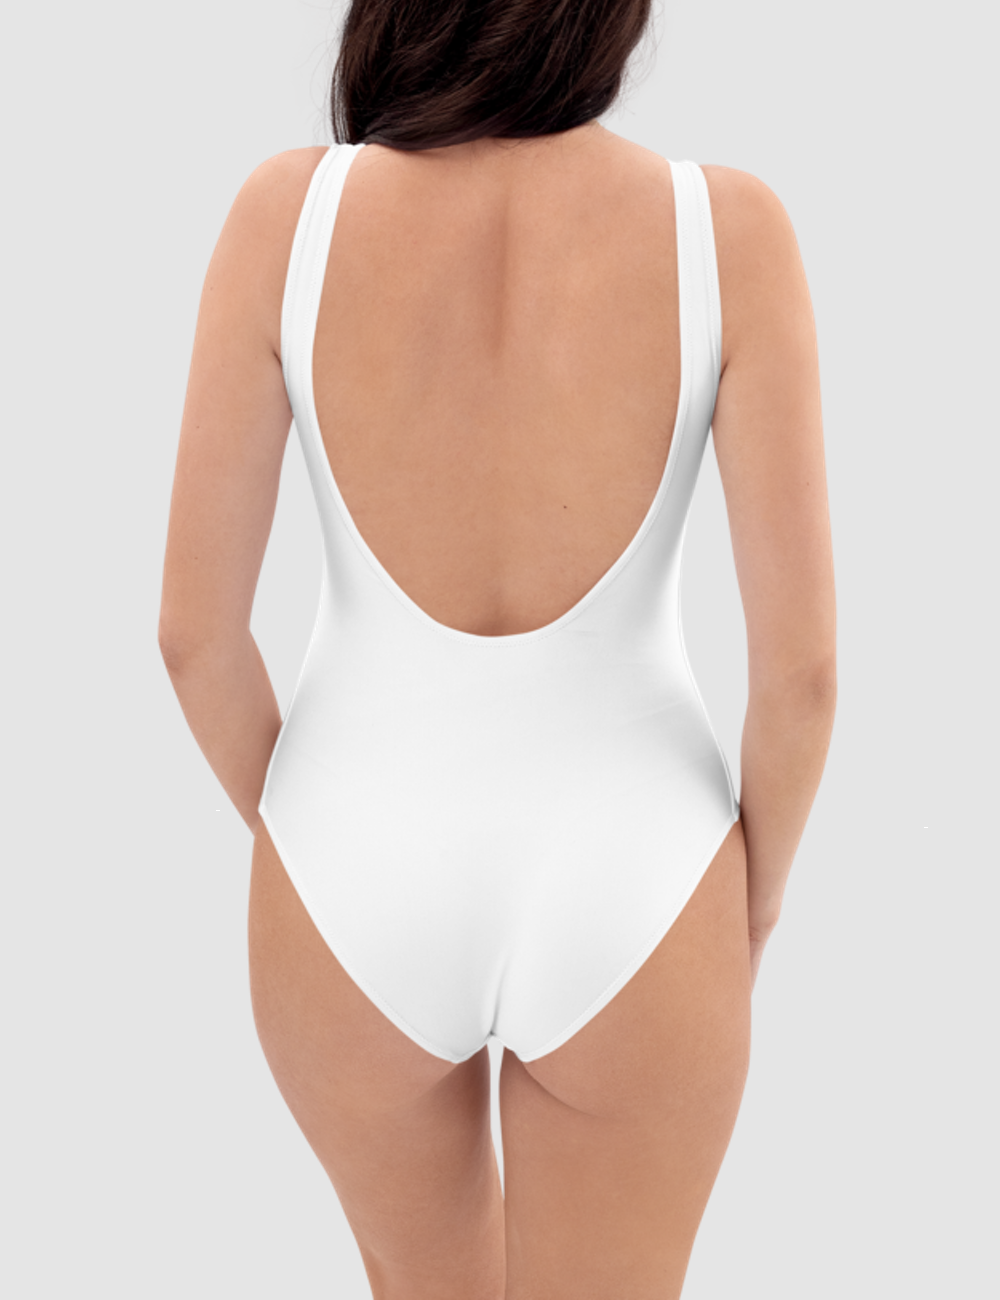 Canadian Red Maple Leaf | Women's One-Piece Swimsuit OniTakai